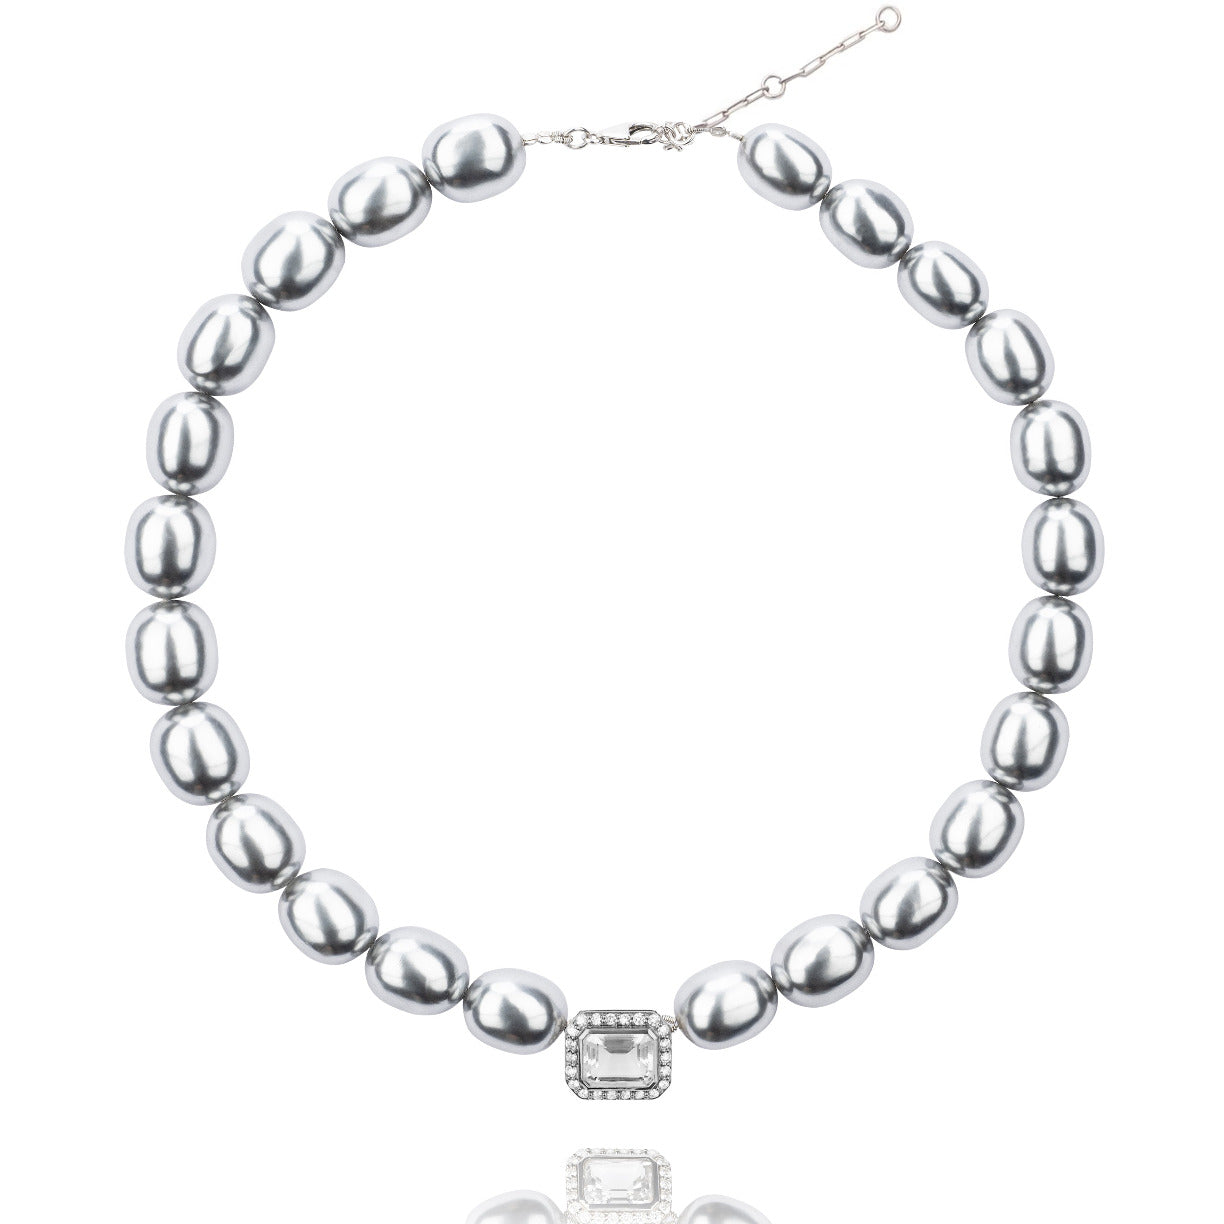 Molly necklace in large gray shell beads, 925 silver and crystal